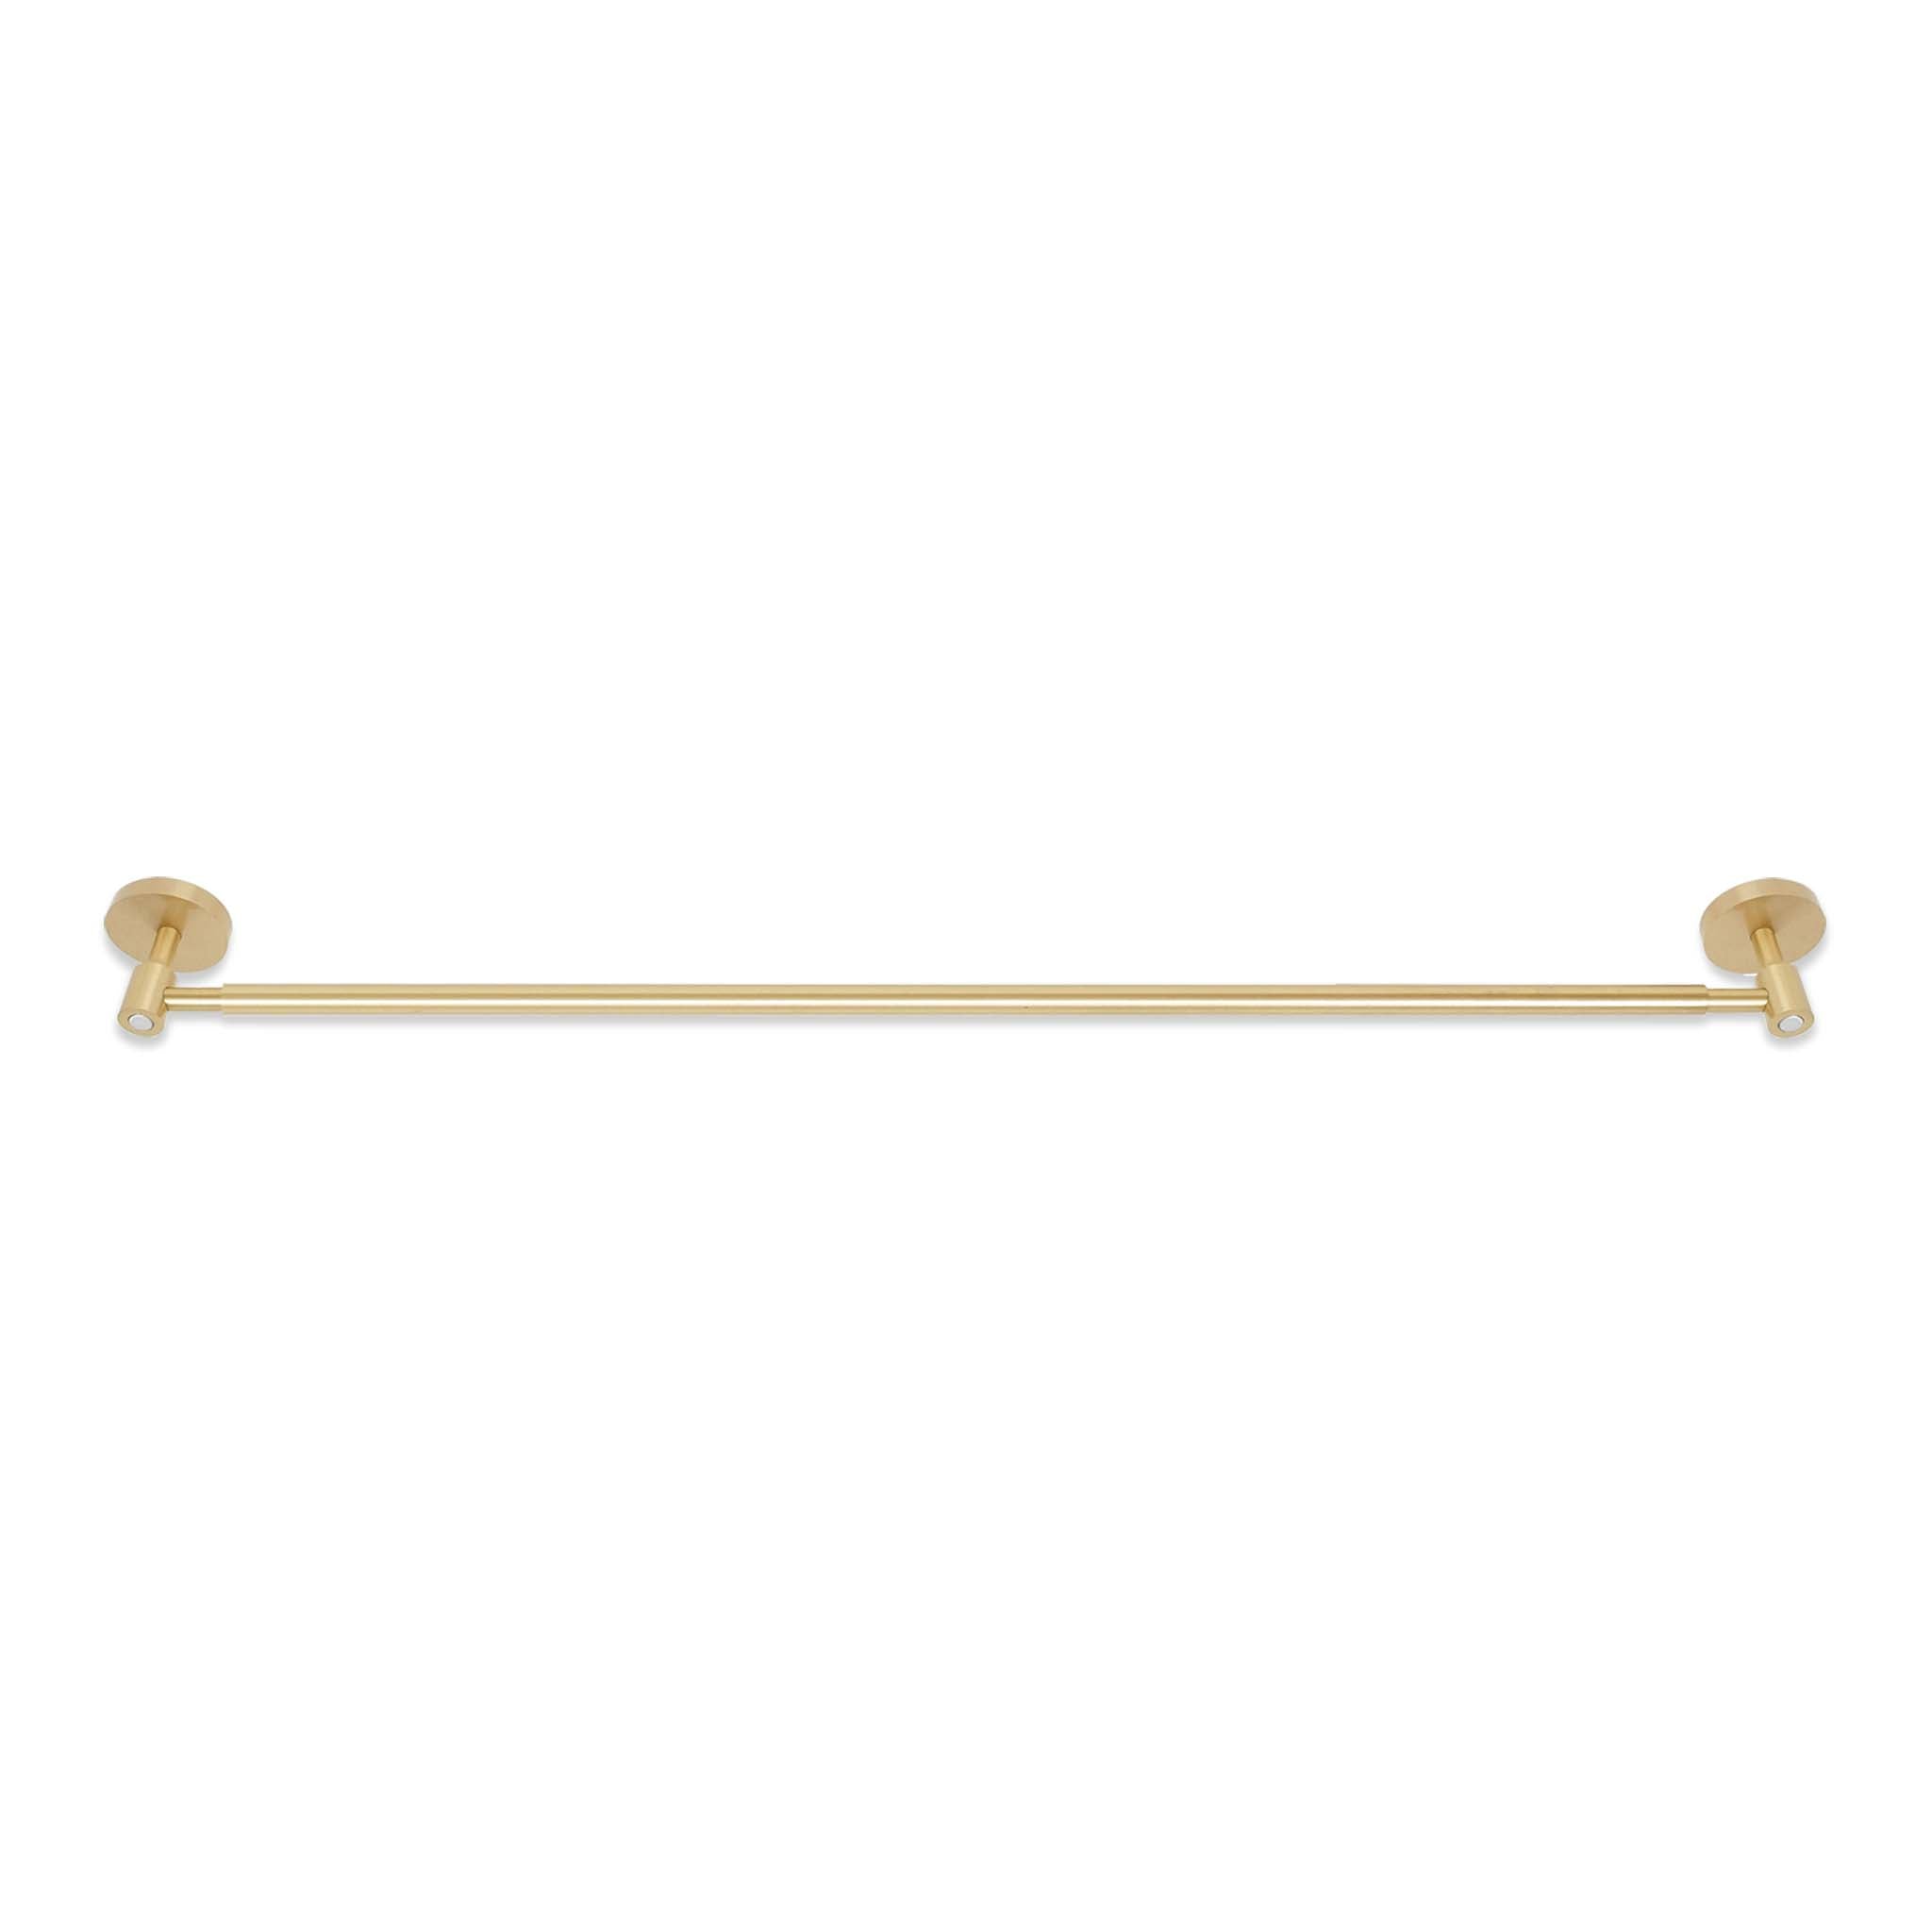 brass and chalk color Head towel bar 24" Dutton Brown hardware